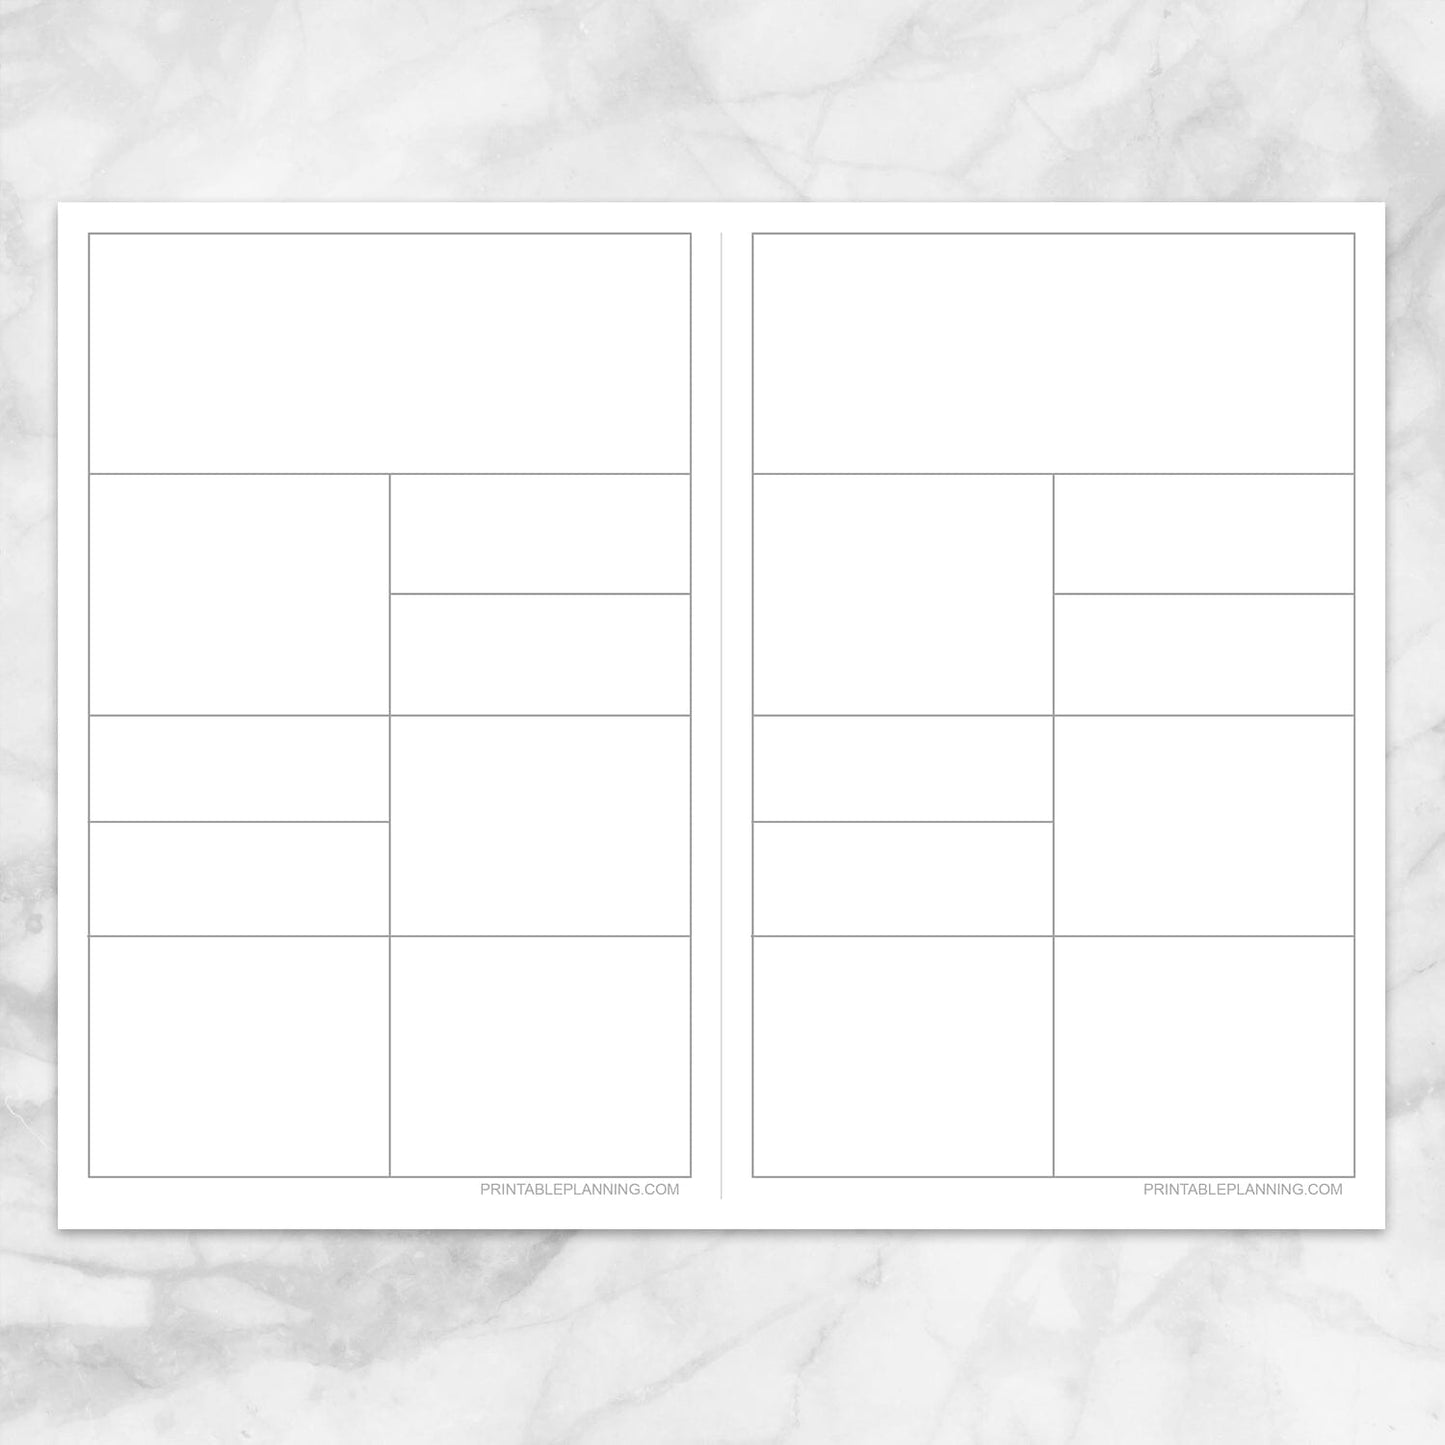 Printable Compartmentalized Scratch Paper - Half Page at Printable Planning. Full page before cutting.